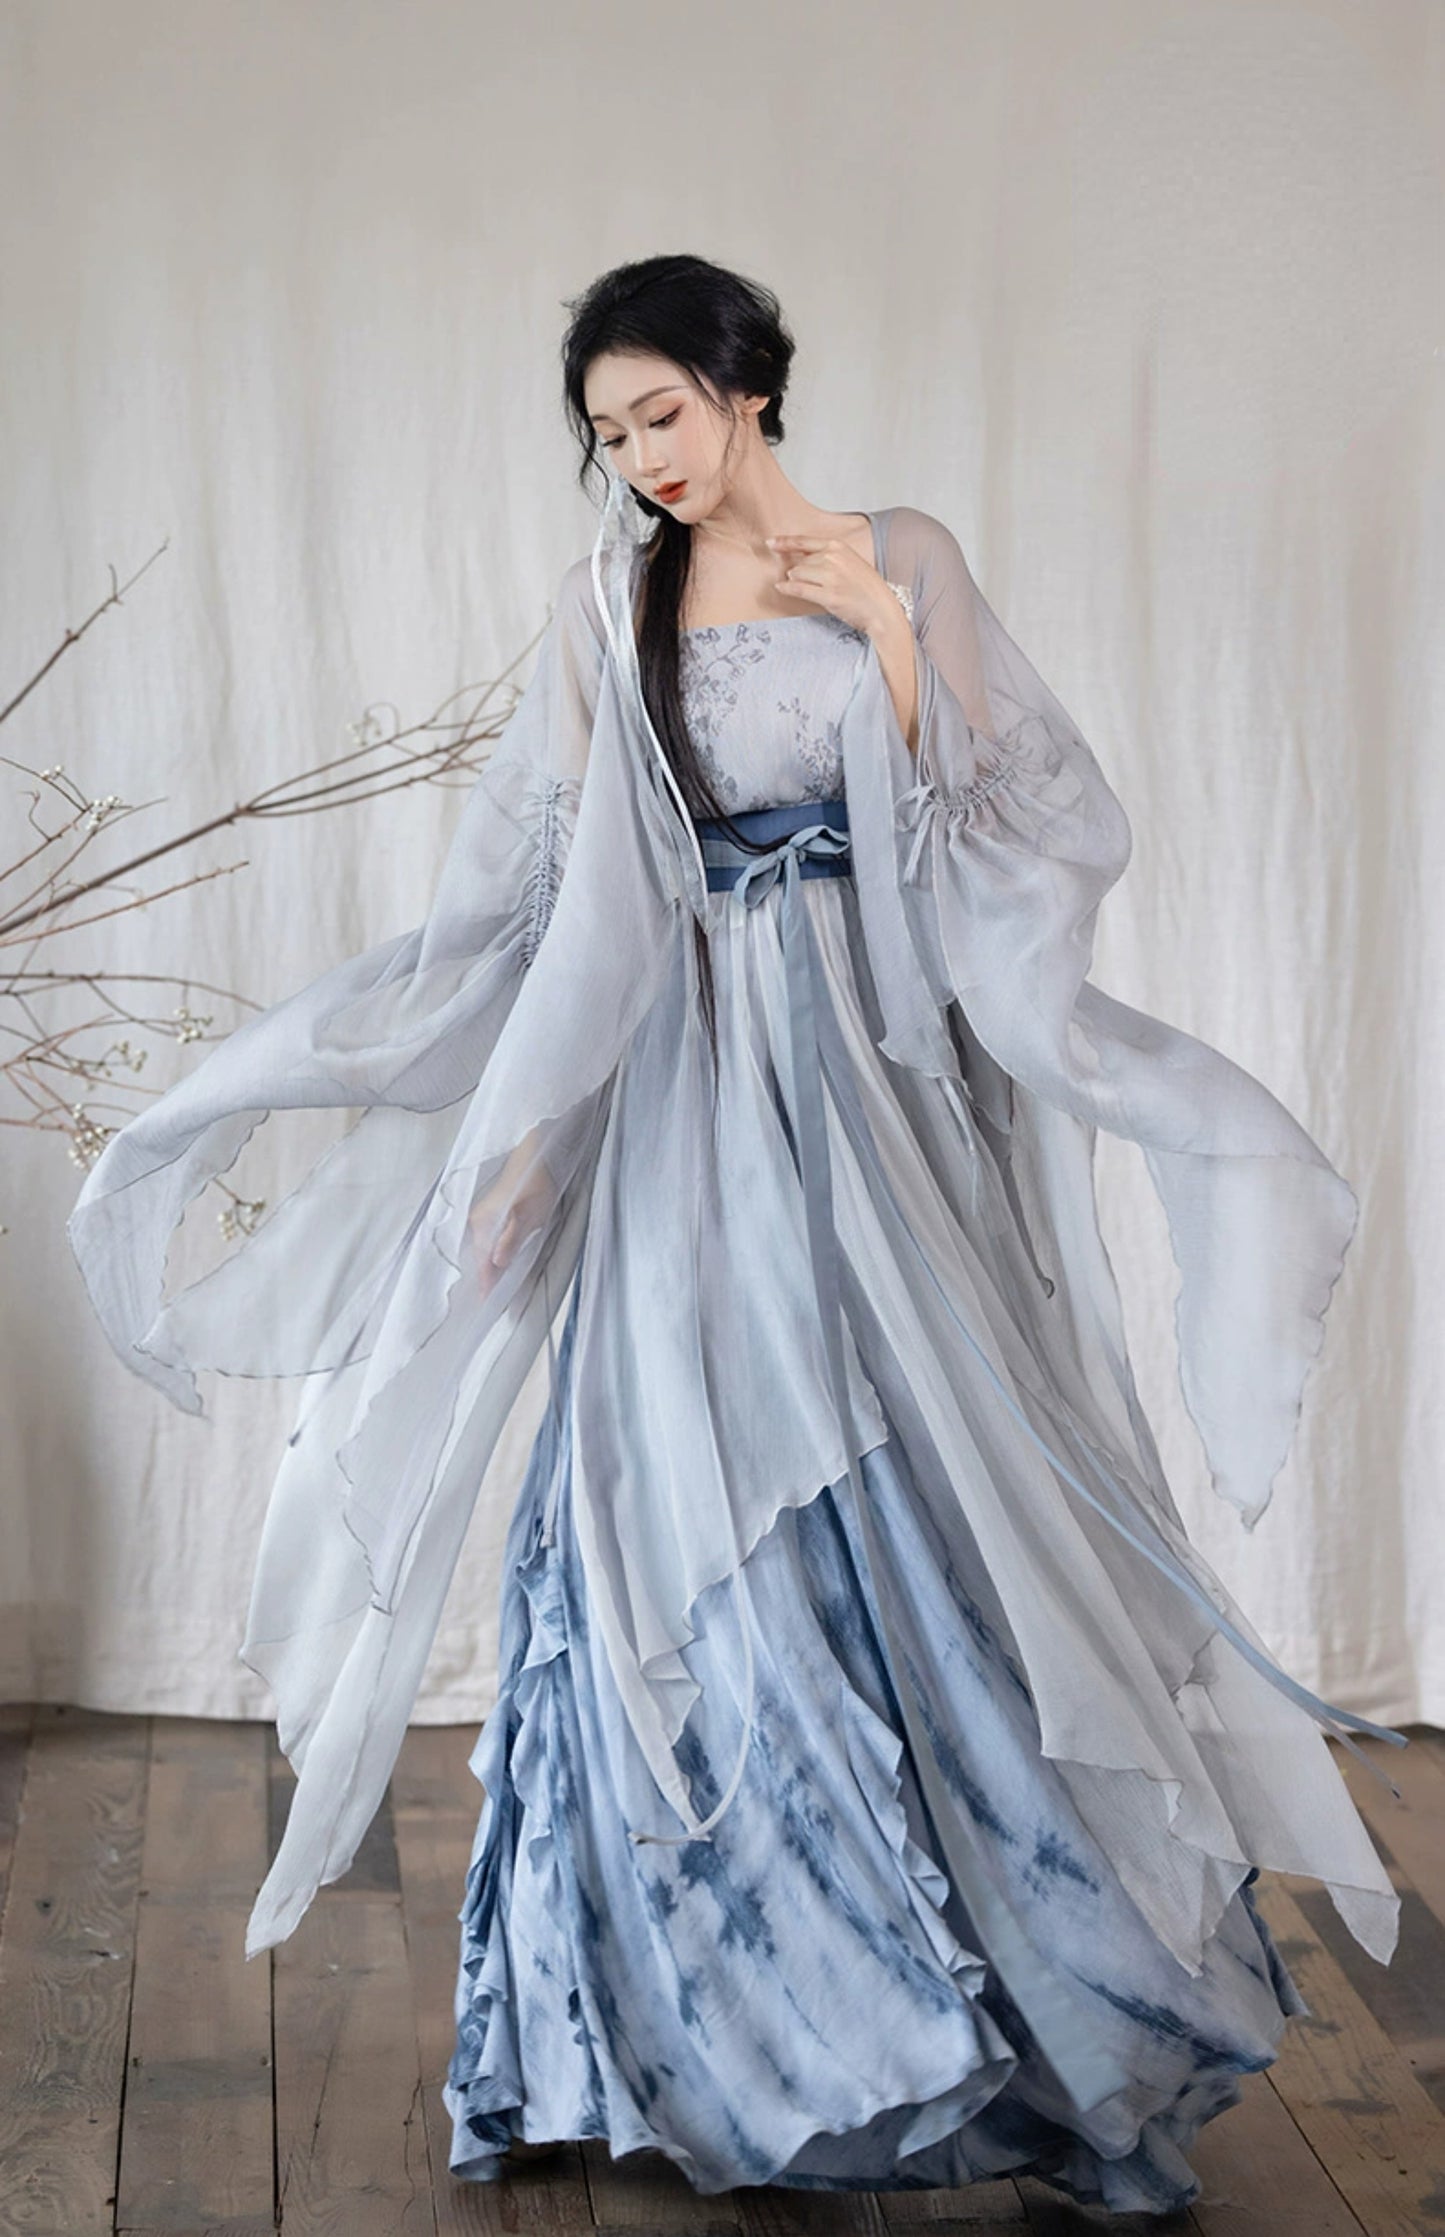 Discover our exquisite modern Hanfu collection, blending traditional elegance with contemporary flair. Featuring daily wear options adorned with tie-dye and irregular skirt designs, enhanced by enchanting fairy elements. Embrace the timeless allure of Hanfu fashion. Shop now and elevate your style!